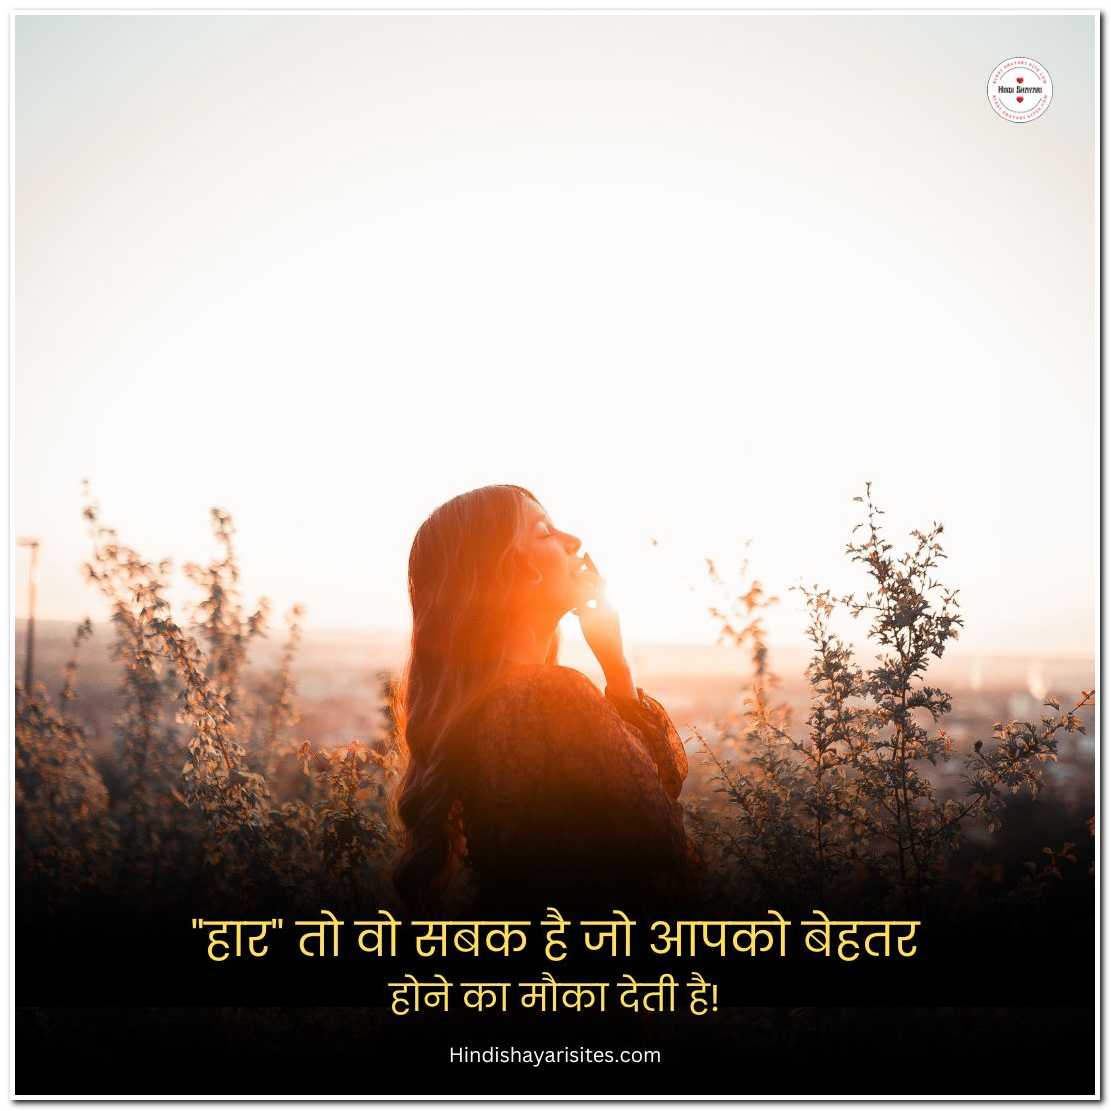 Good Thoughts In Hindi For Students